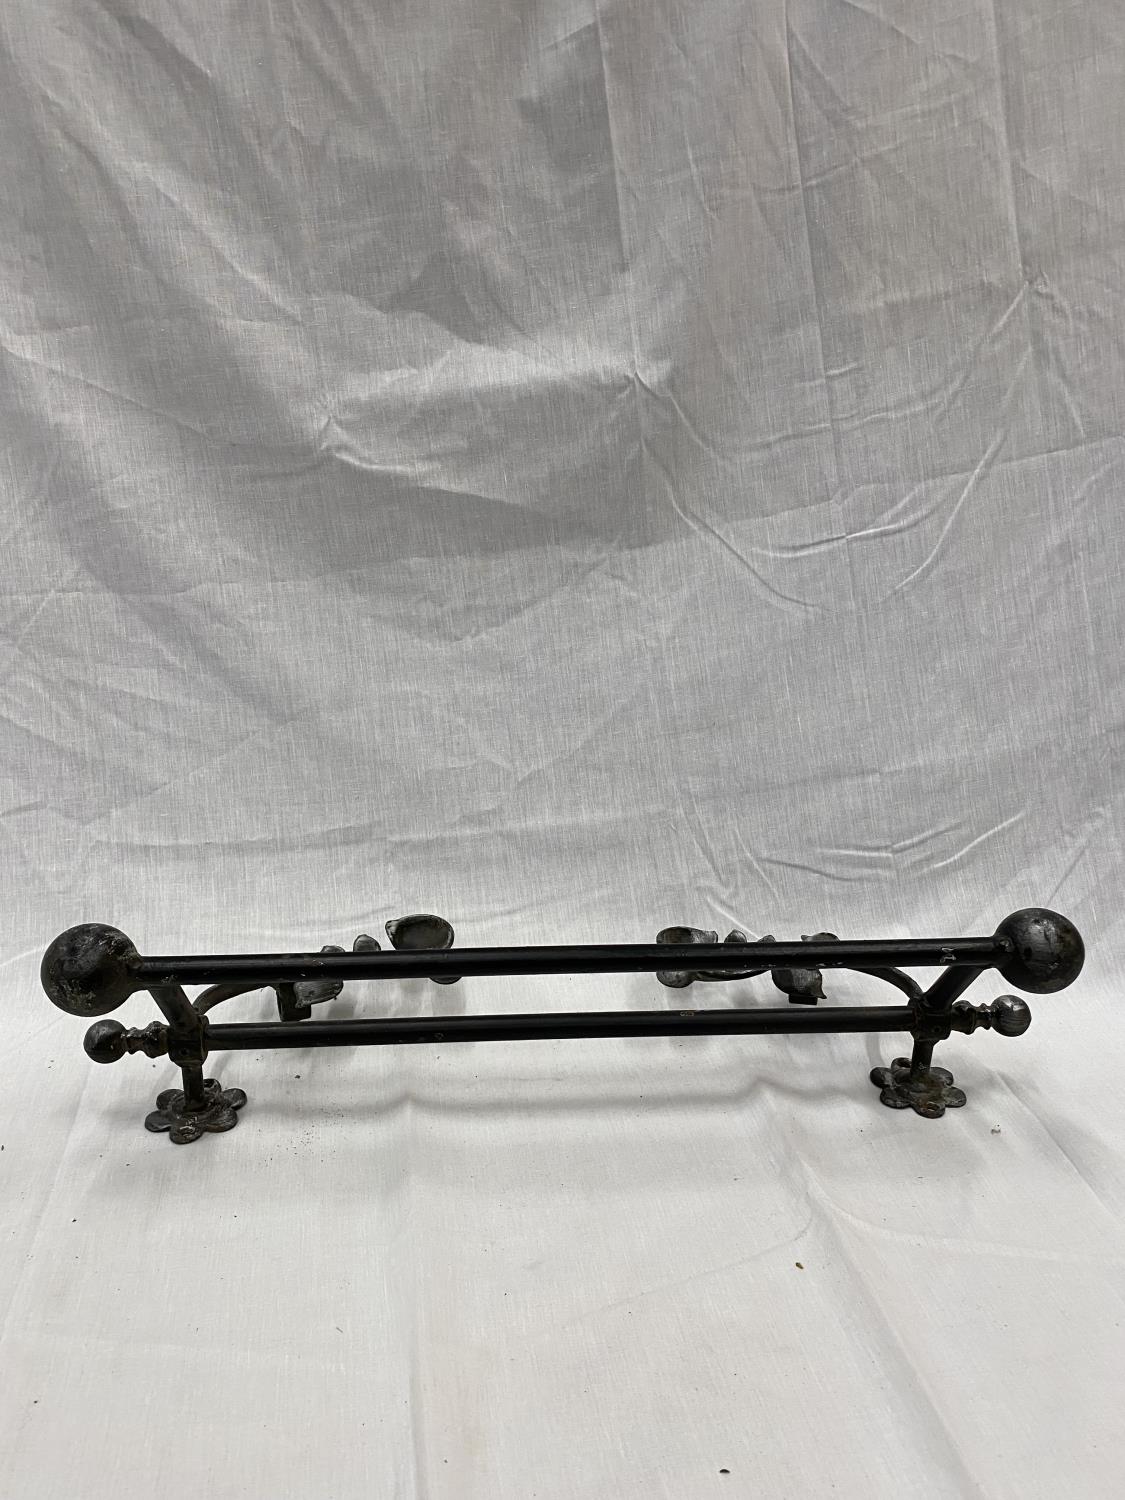 A DECORATIVE WROUGHT IRON WALL MOUNTED RACK/RAIL - Image 4 of 12